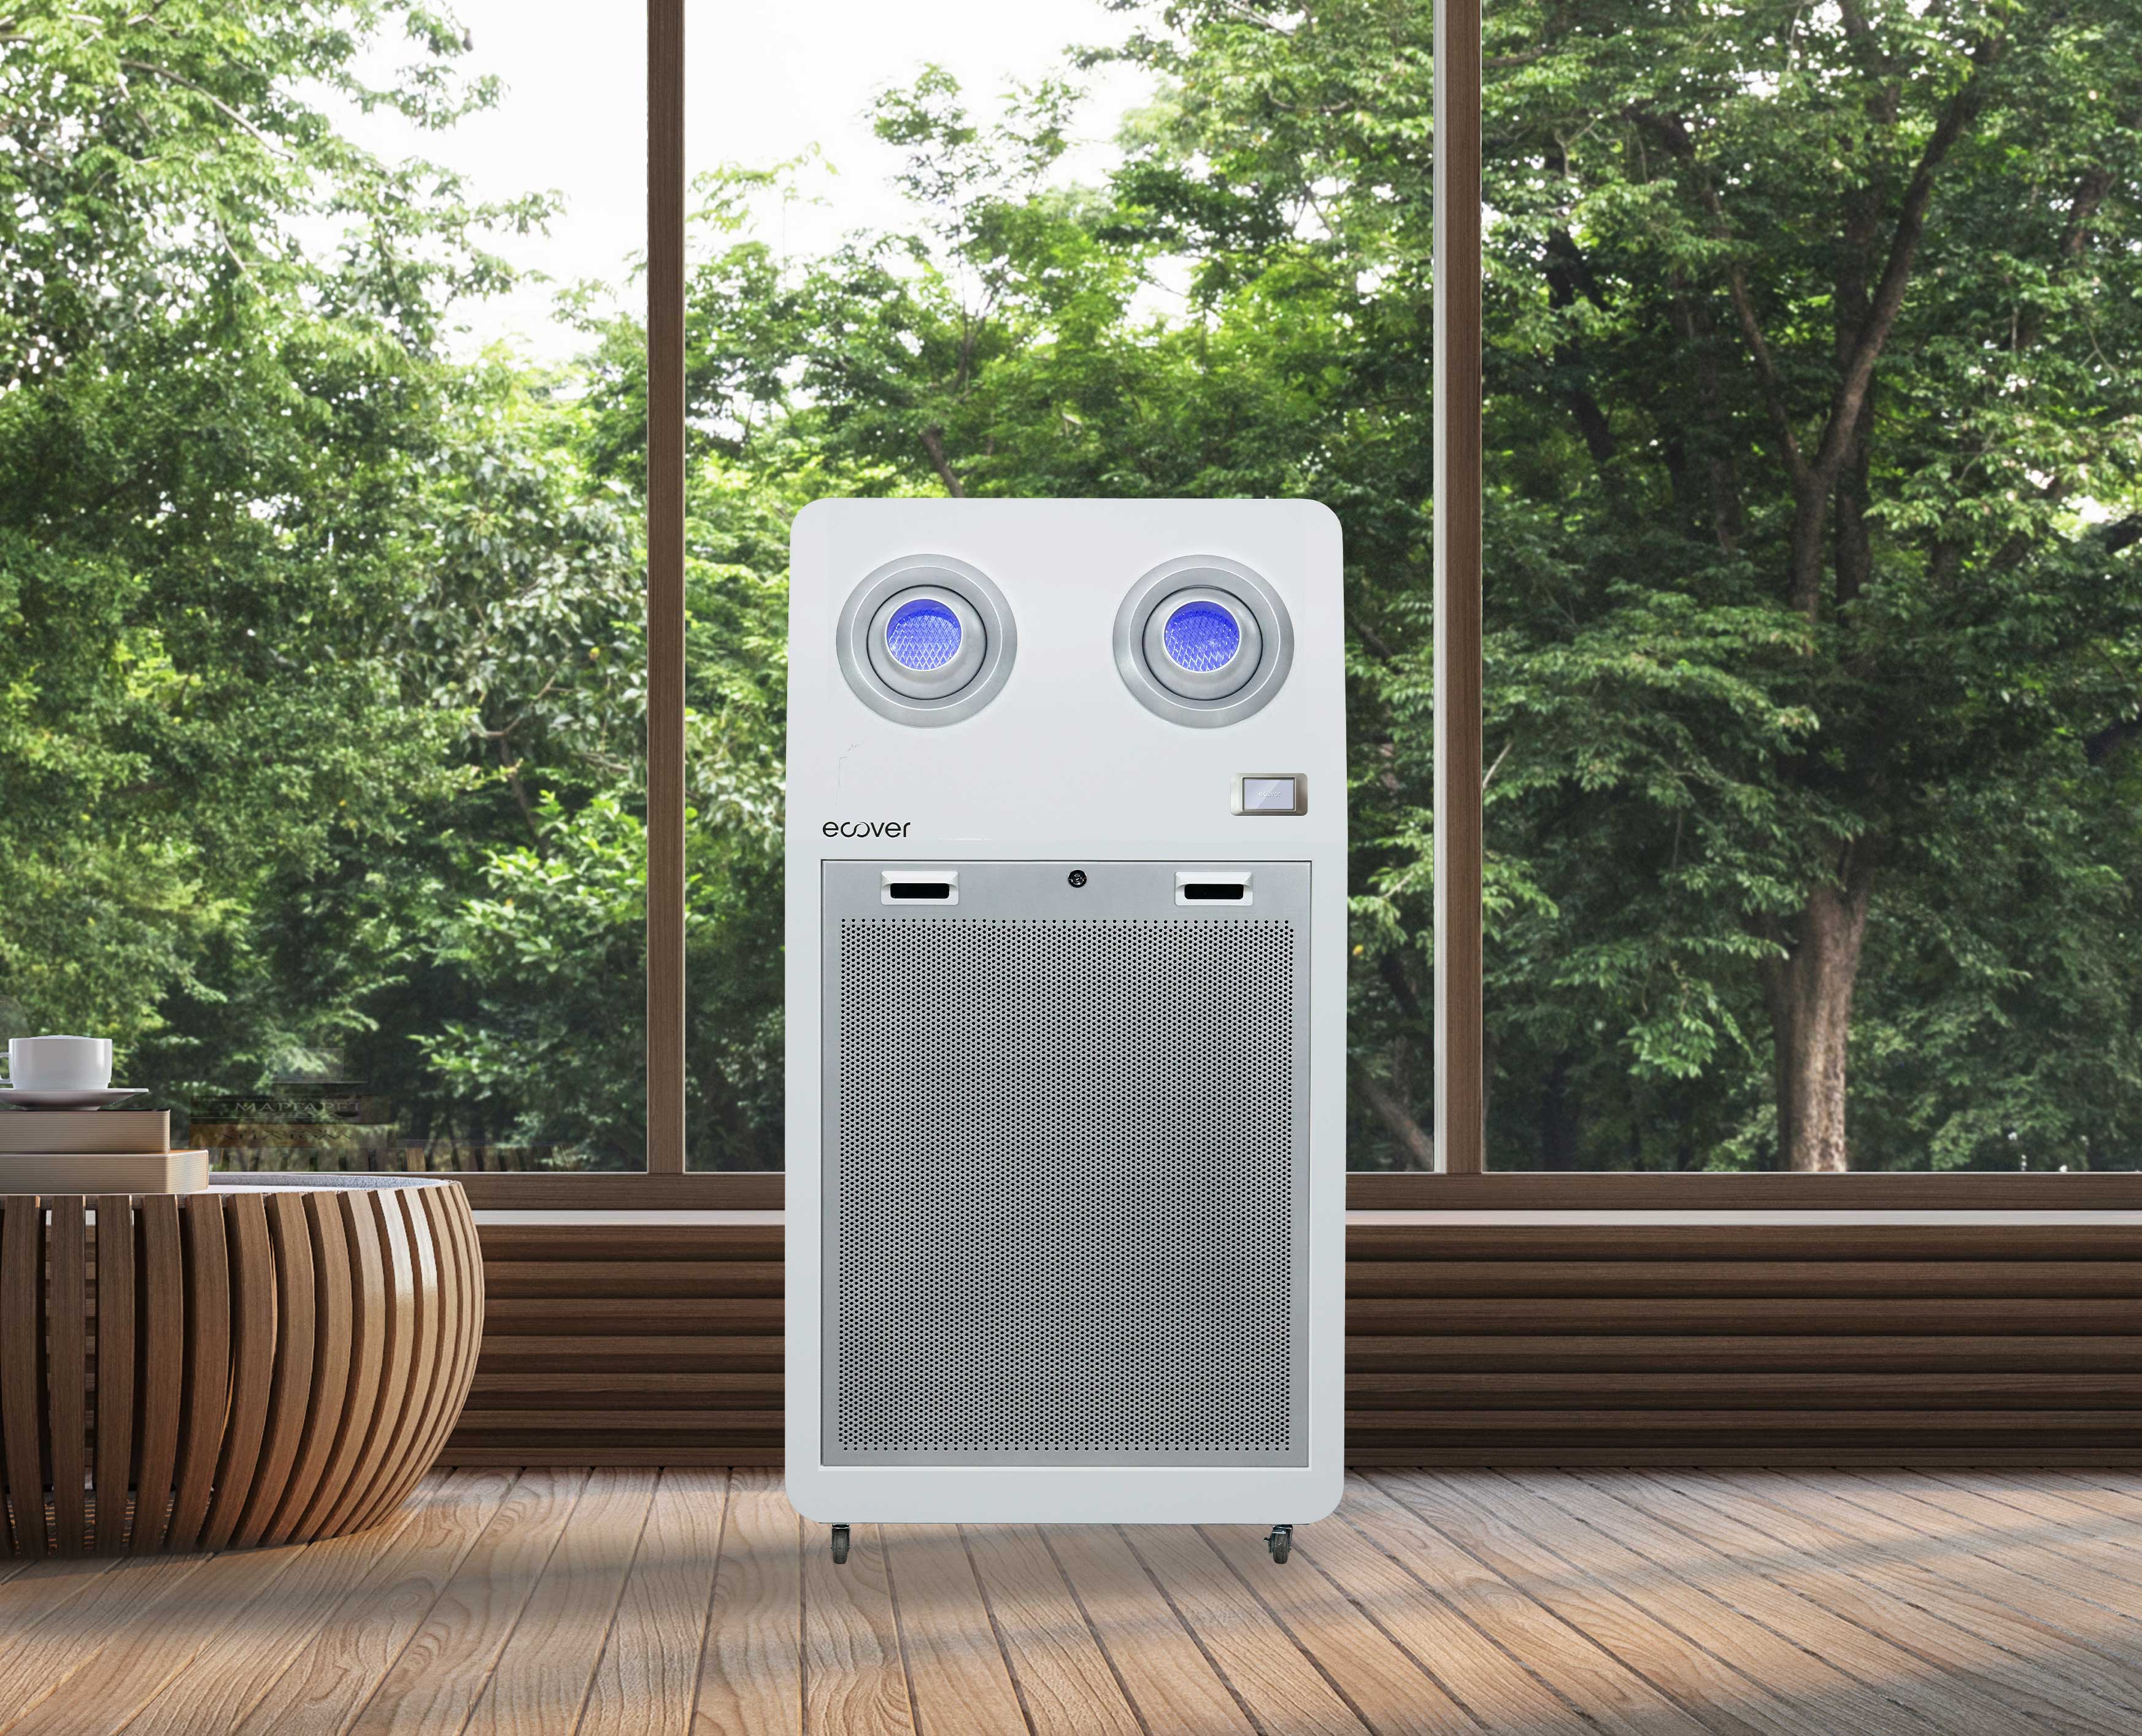 This image features ECOVER Large Capacity Air Purifier Q Series with a background showing a landscape with trees, highlighting the eco-friendly and environmentally connected aspect of the product.